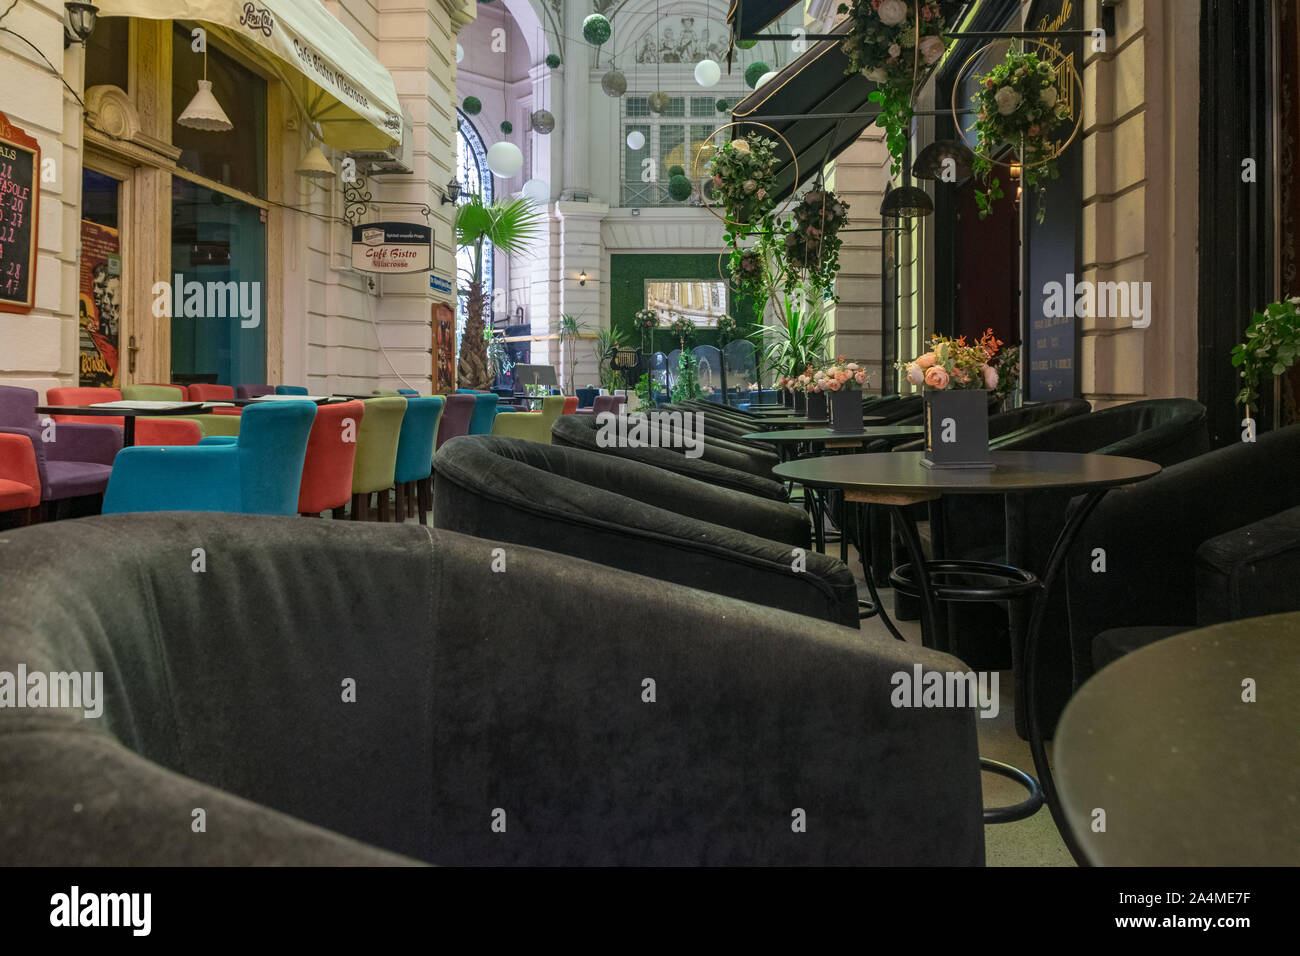 BUCHAREST, ROMANIA - 27 JULY, 2019: Restaurants at the Macca Villacrosse  Passage - a fork-shaped, yellow glass covered arcaded street in central  Bucha Stock Photo - Alamy